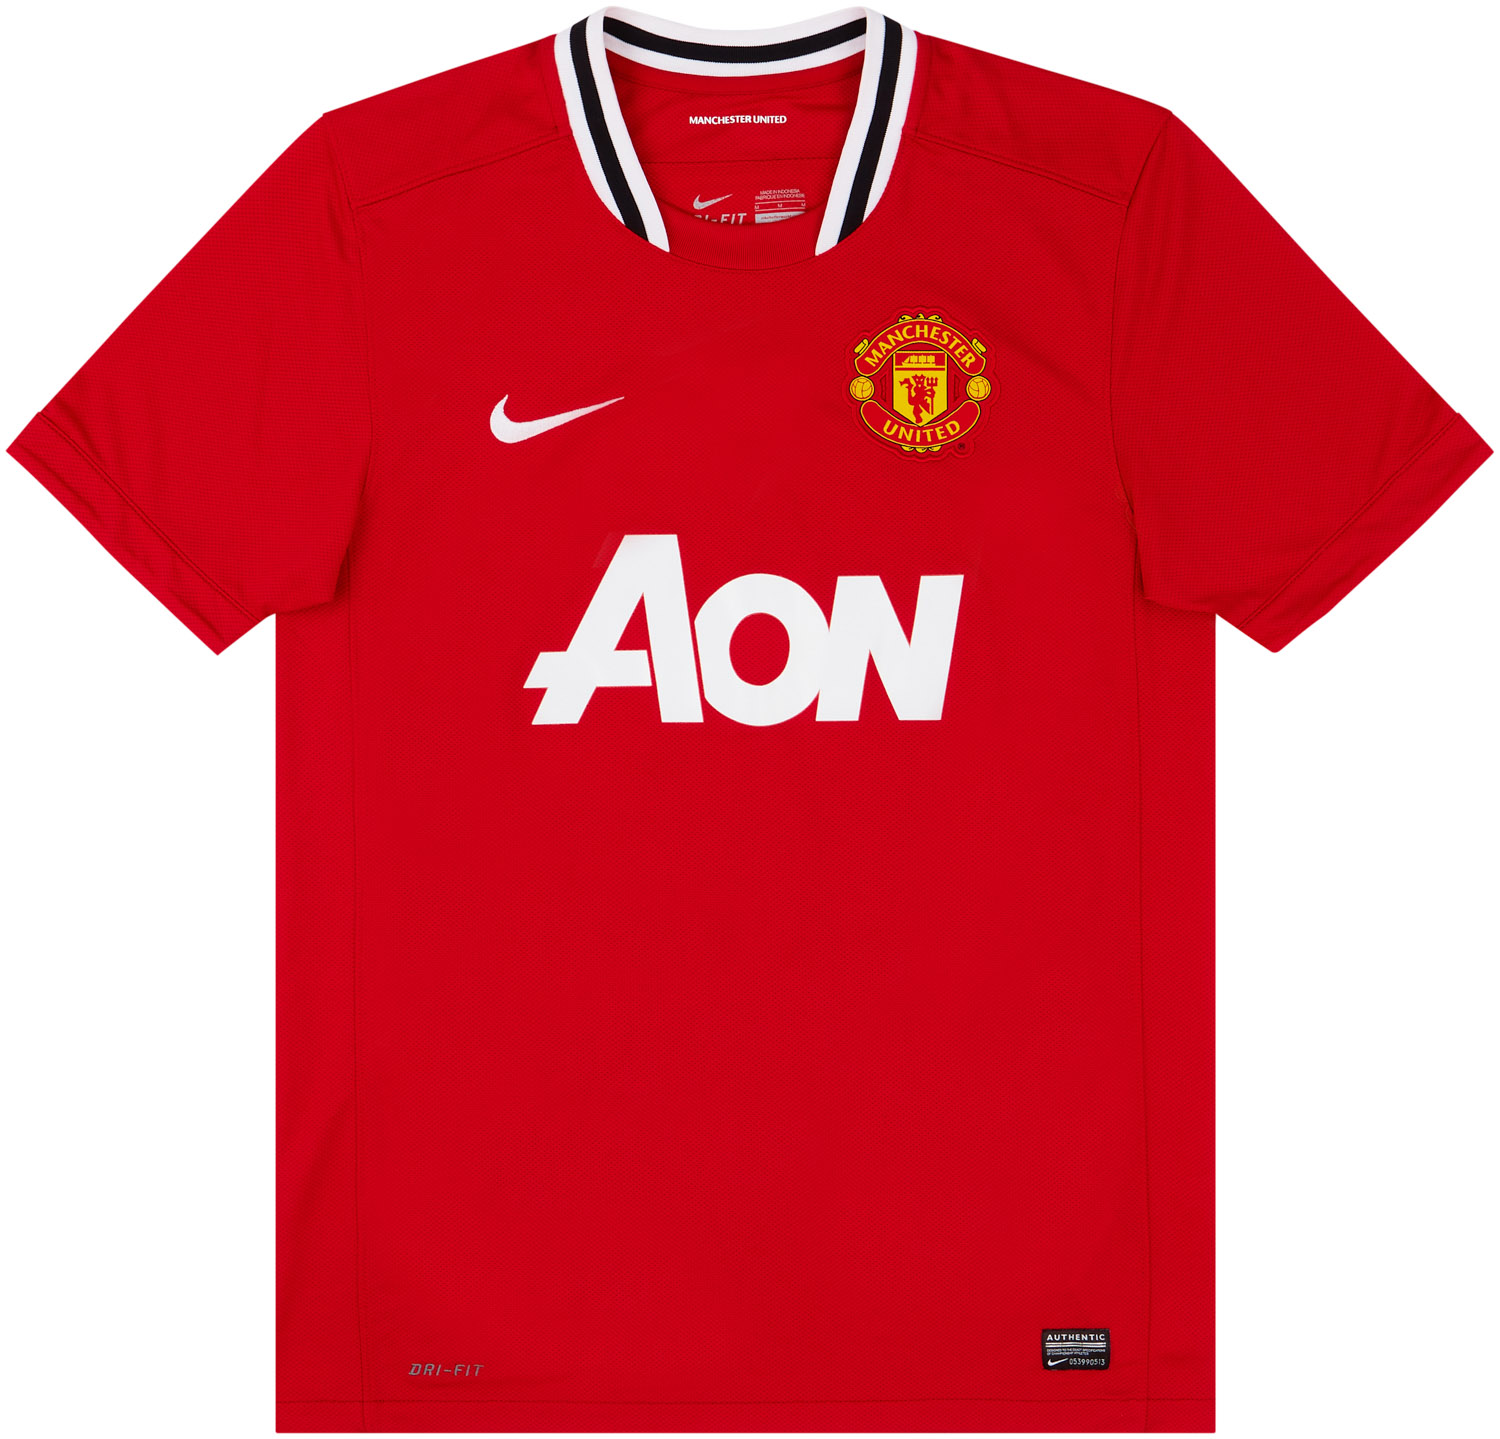 2011-12 Manchester United Home Shirt - 6/10 -